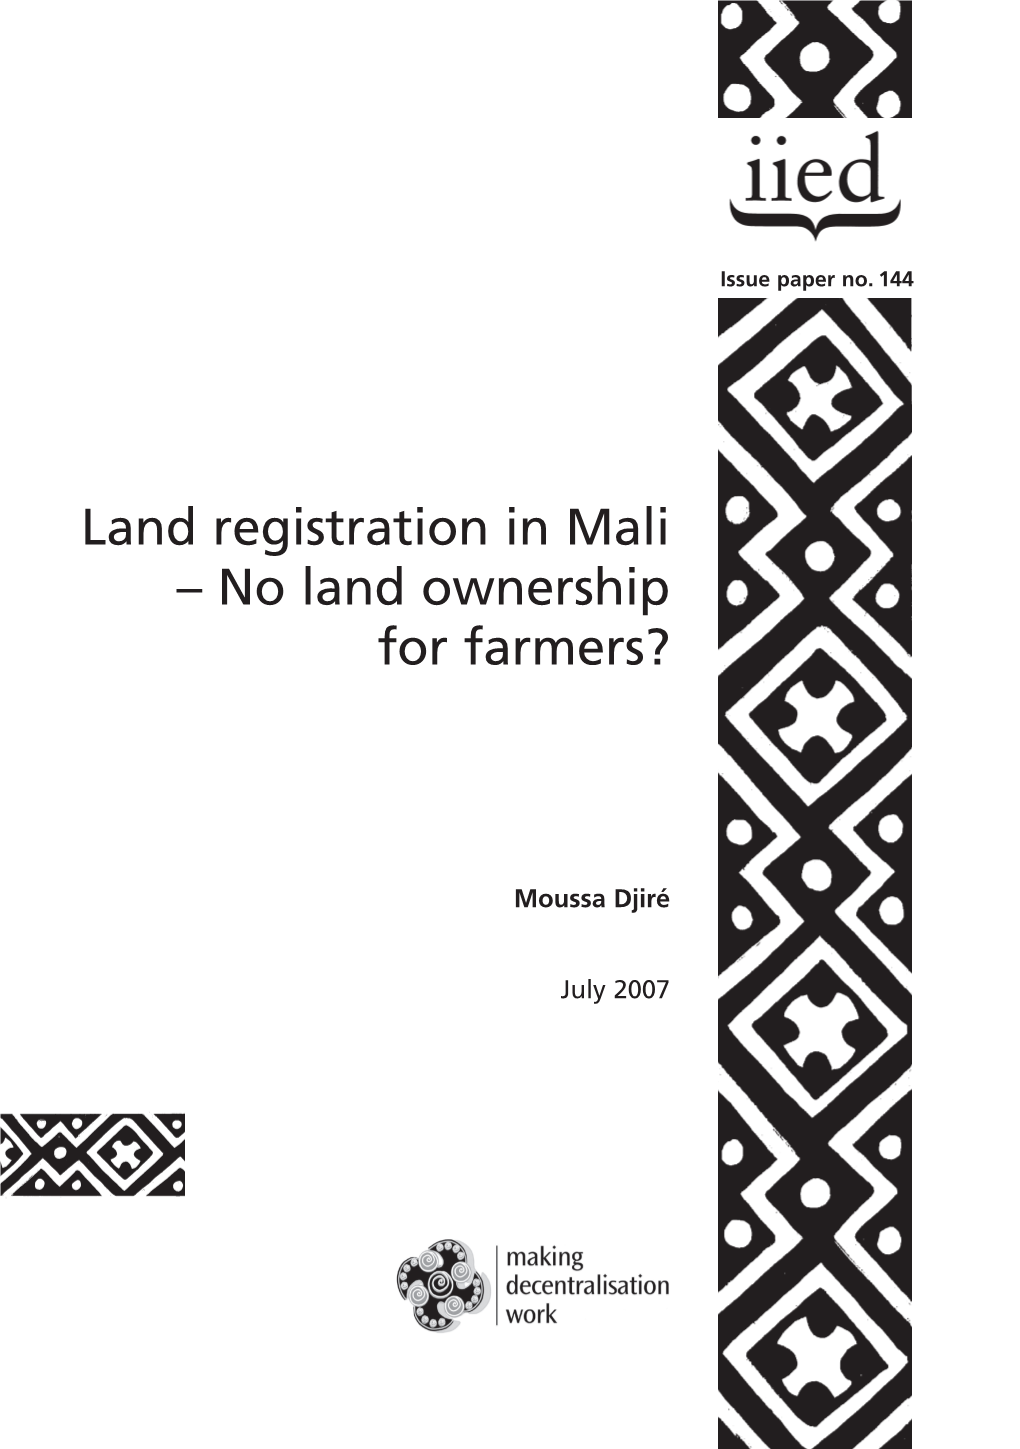 Land Registration in Mali – No Land Ownership for Farmers?